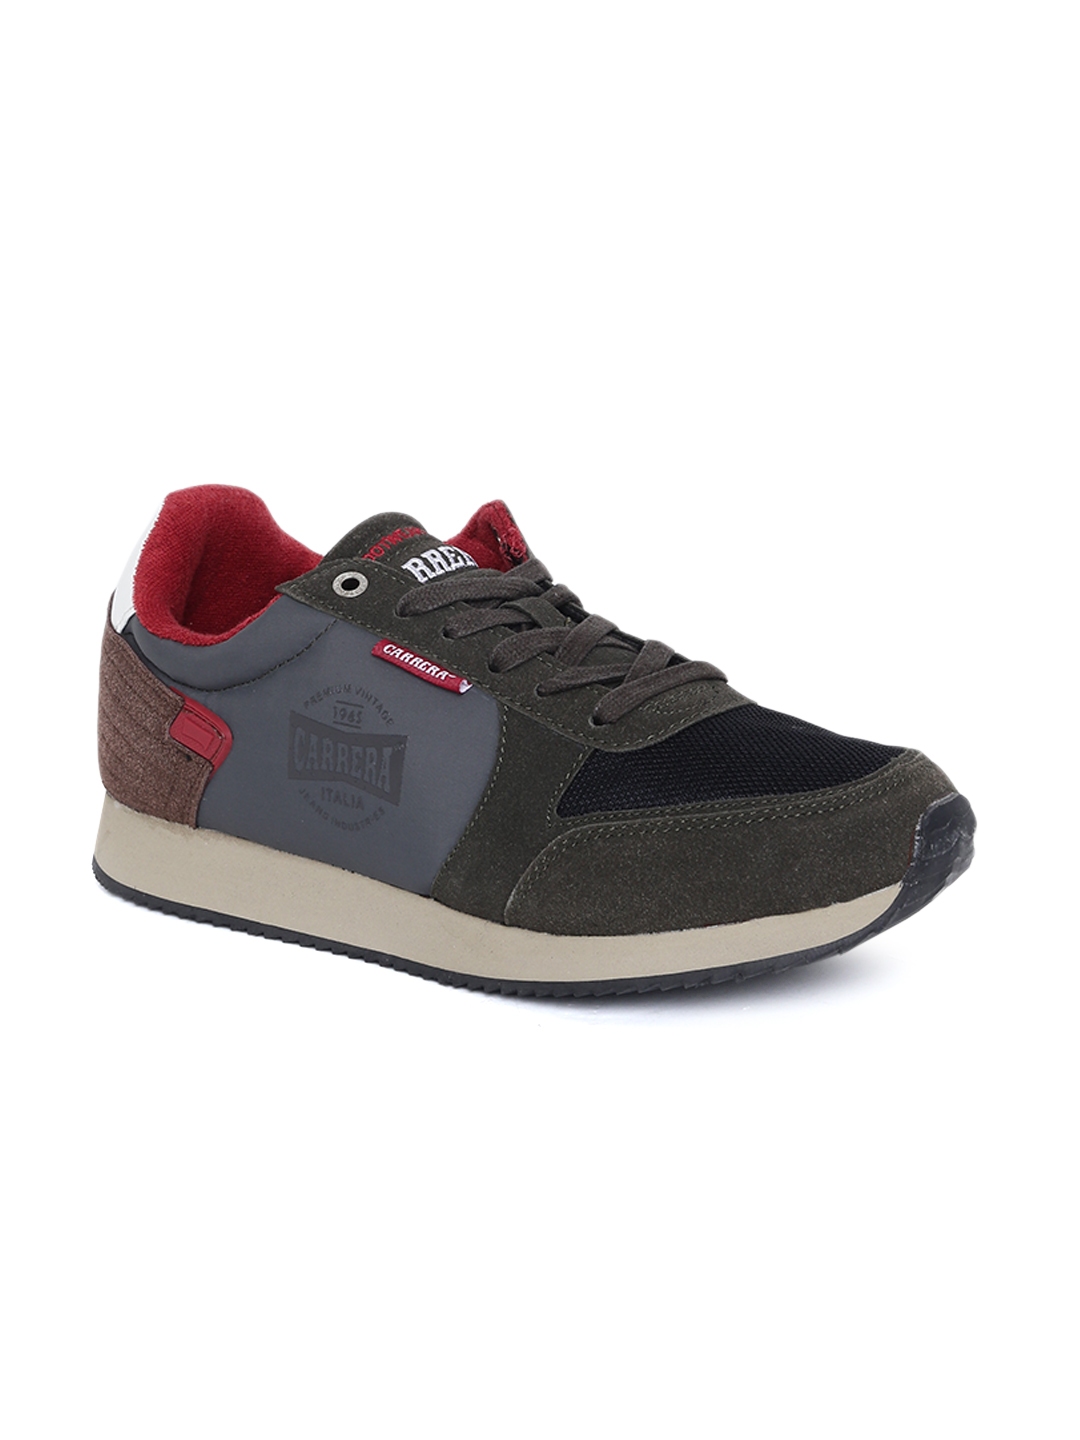 Buy Carrera Men Olive Green & Grey Sneakers - Casual Shoes for Men 8084781  | Myntra